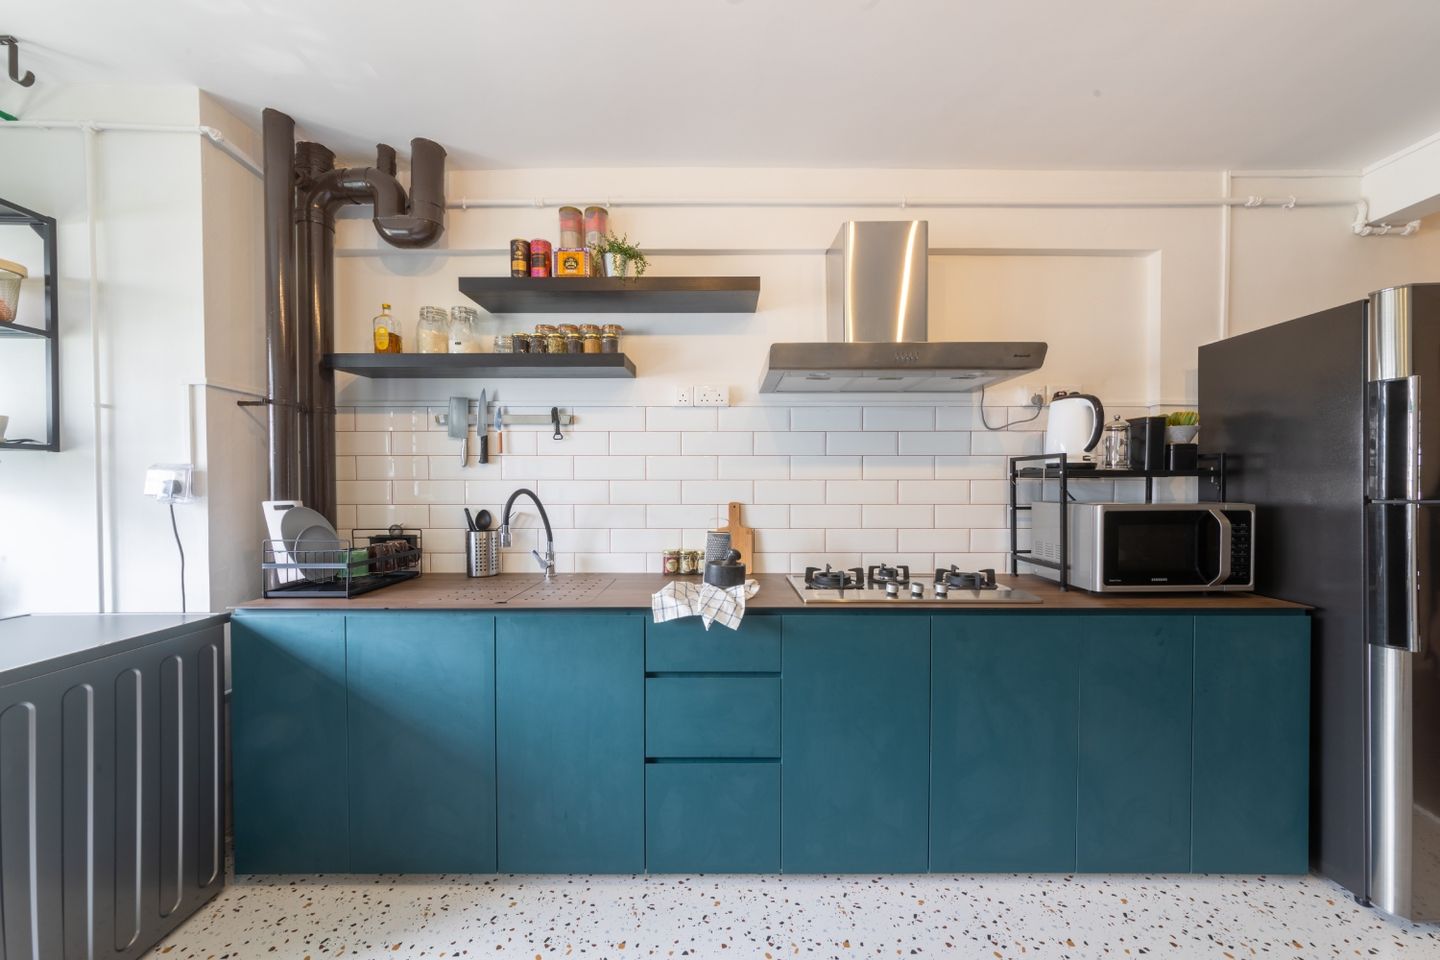 Straight Kitchen Design With Teal Blue Base Units - Livspace